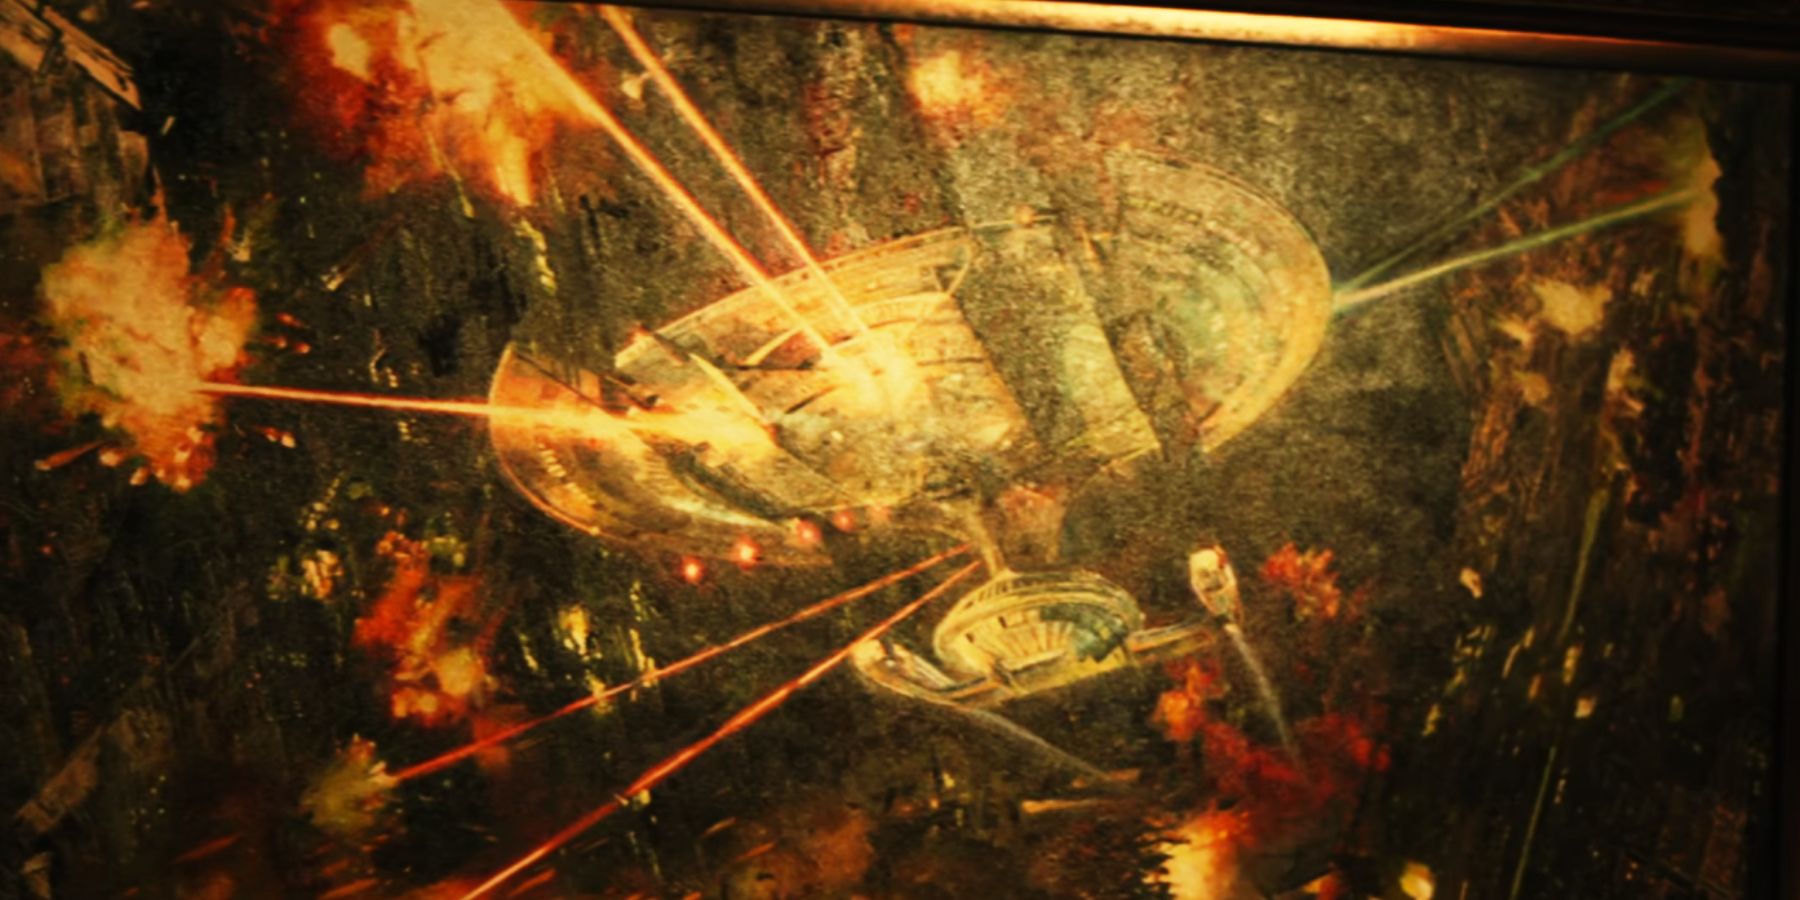 The painting of the evil Enterprise in Picard season 2